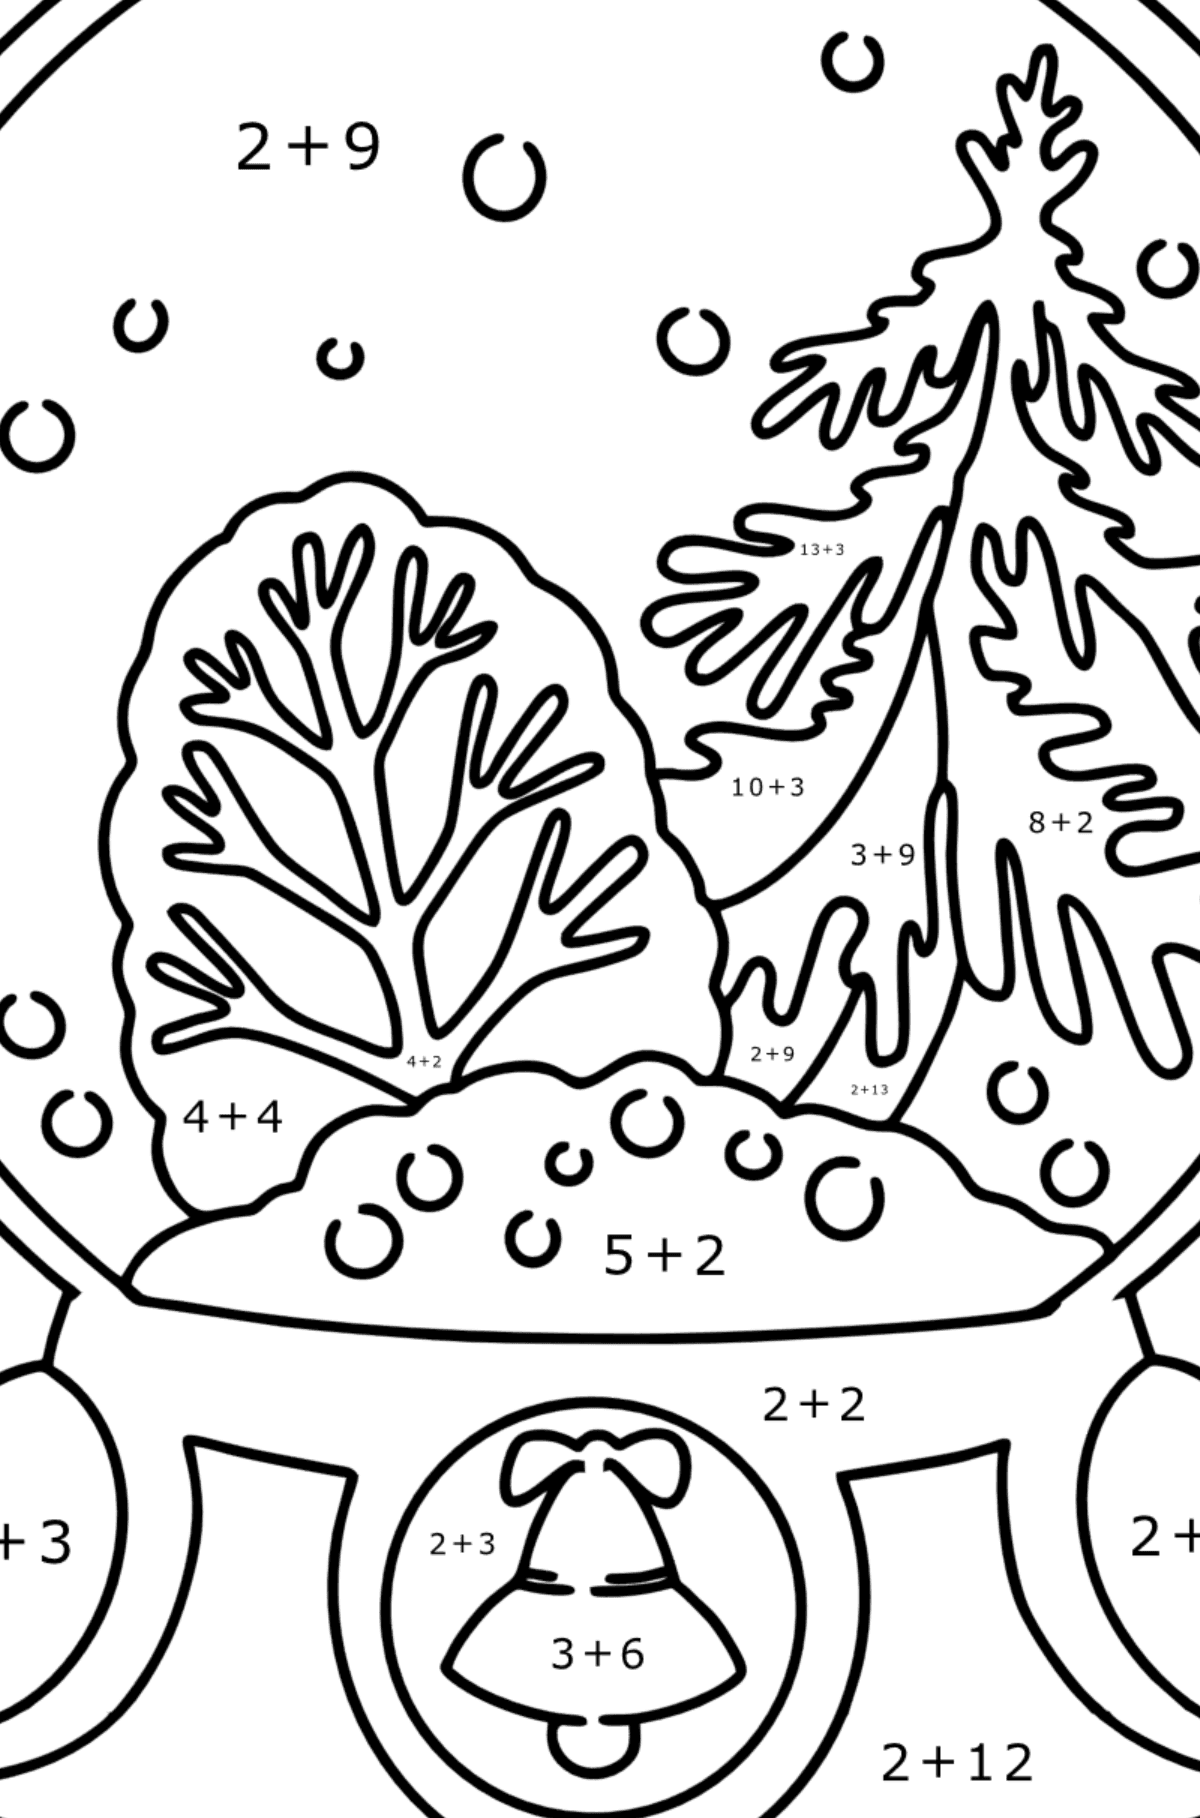 Snow Globe coloring page - Math Coloring - Addition for Kids